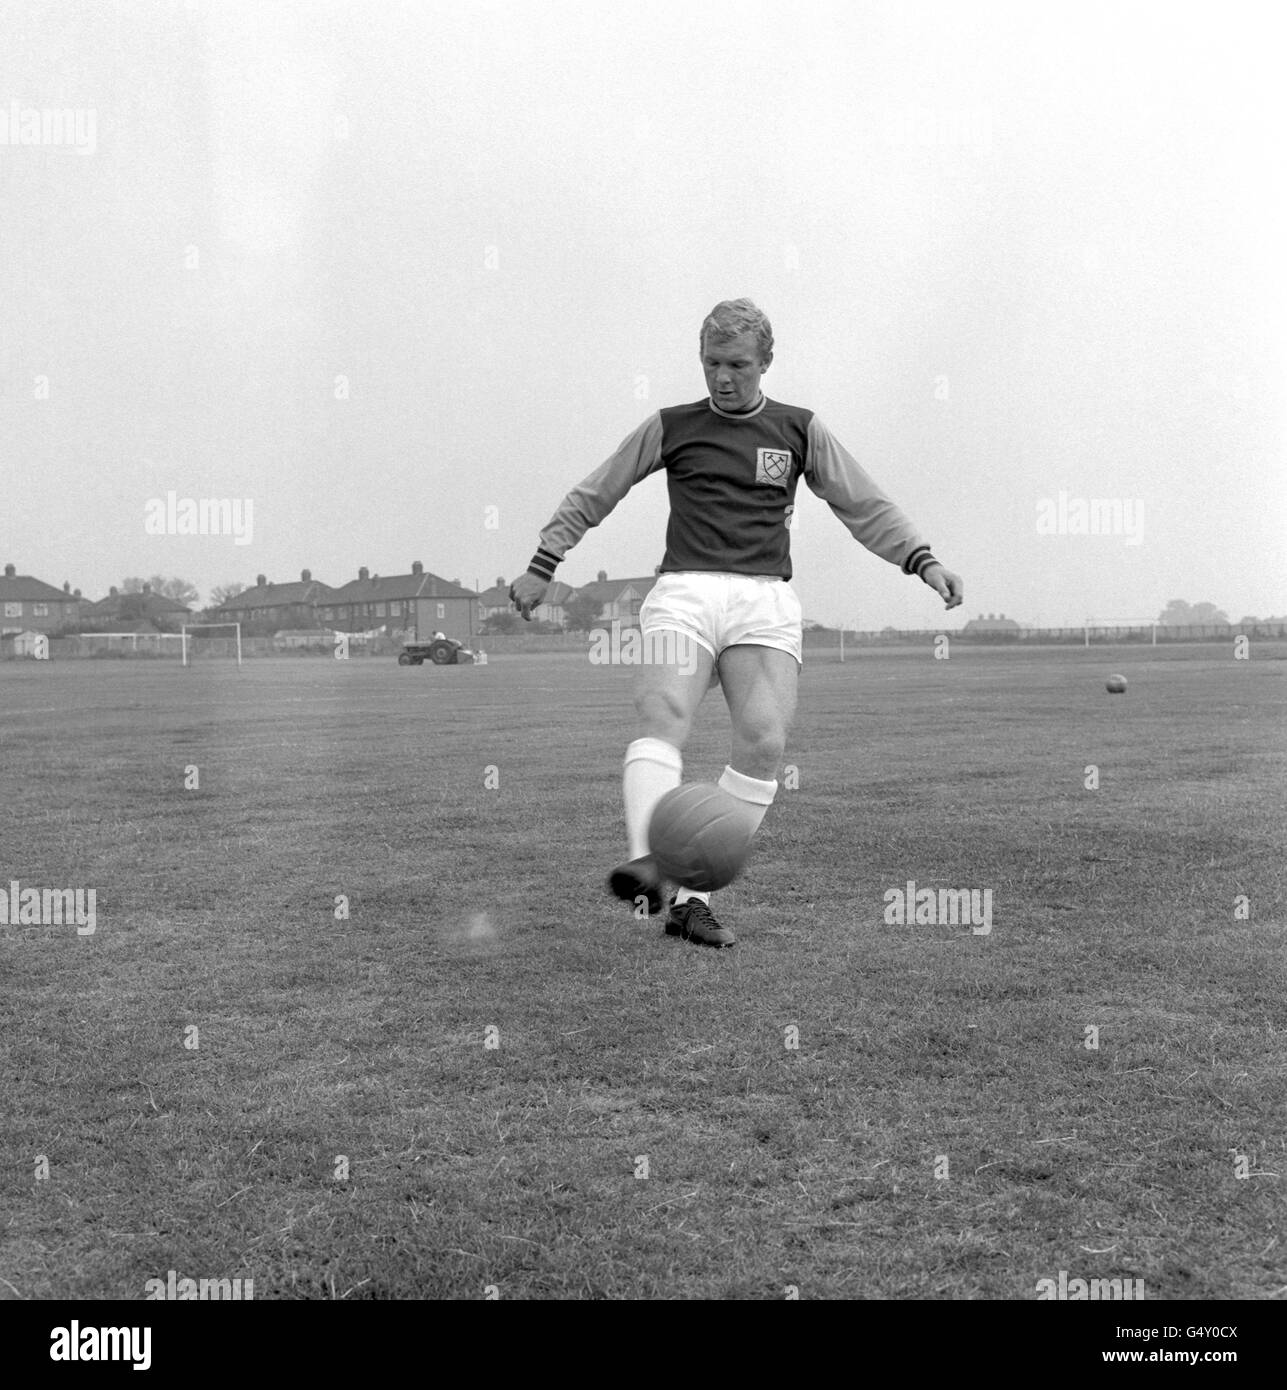 Bobby Moore/Training. Captain of West Ham United and England, footballer Bobby Moore juggling a football in training. Stock Photo